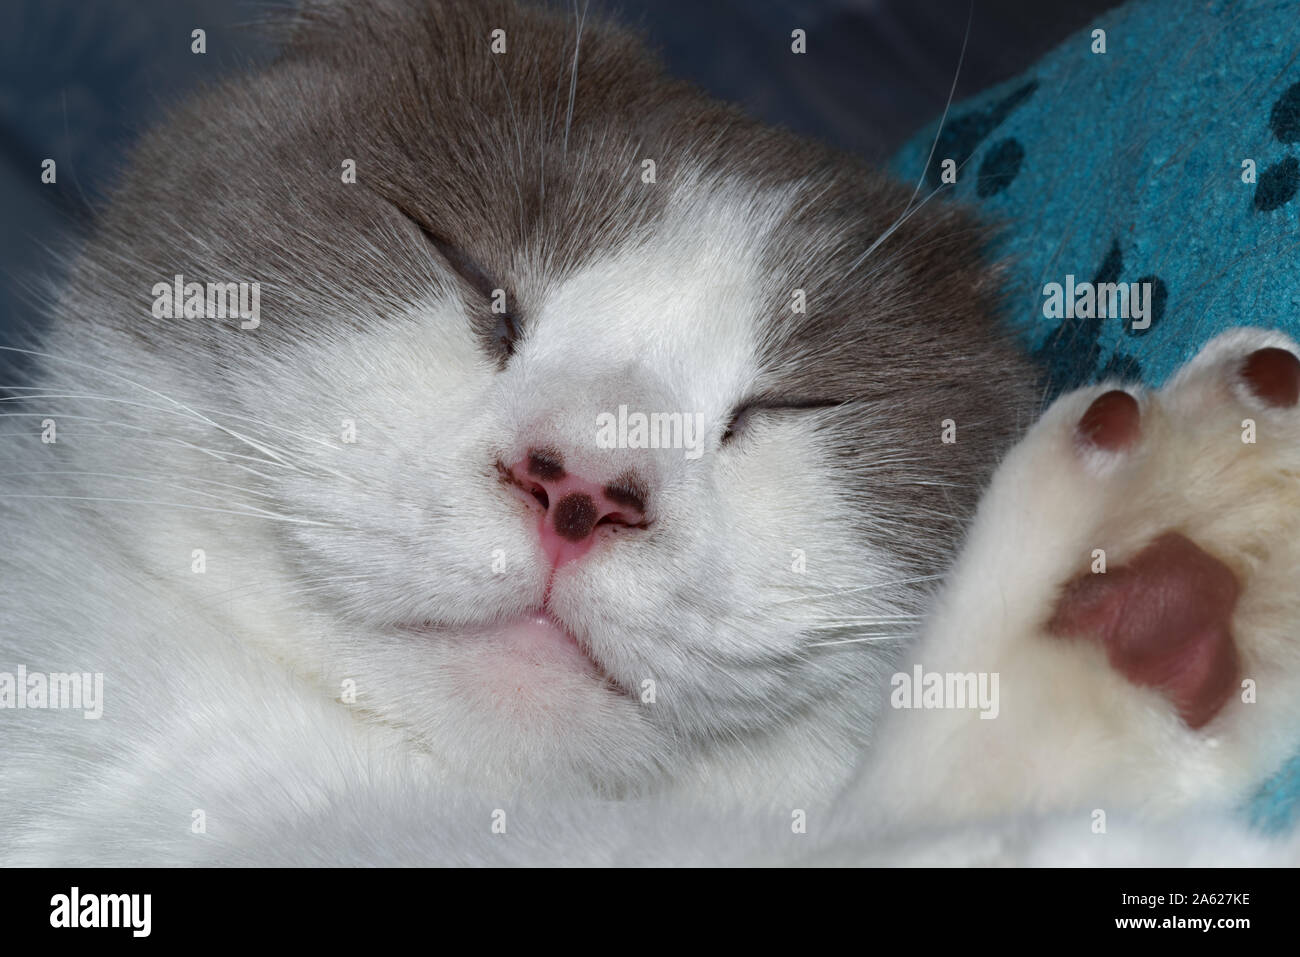 Close-up of a sleeping cat with white gray fur Stock Photo